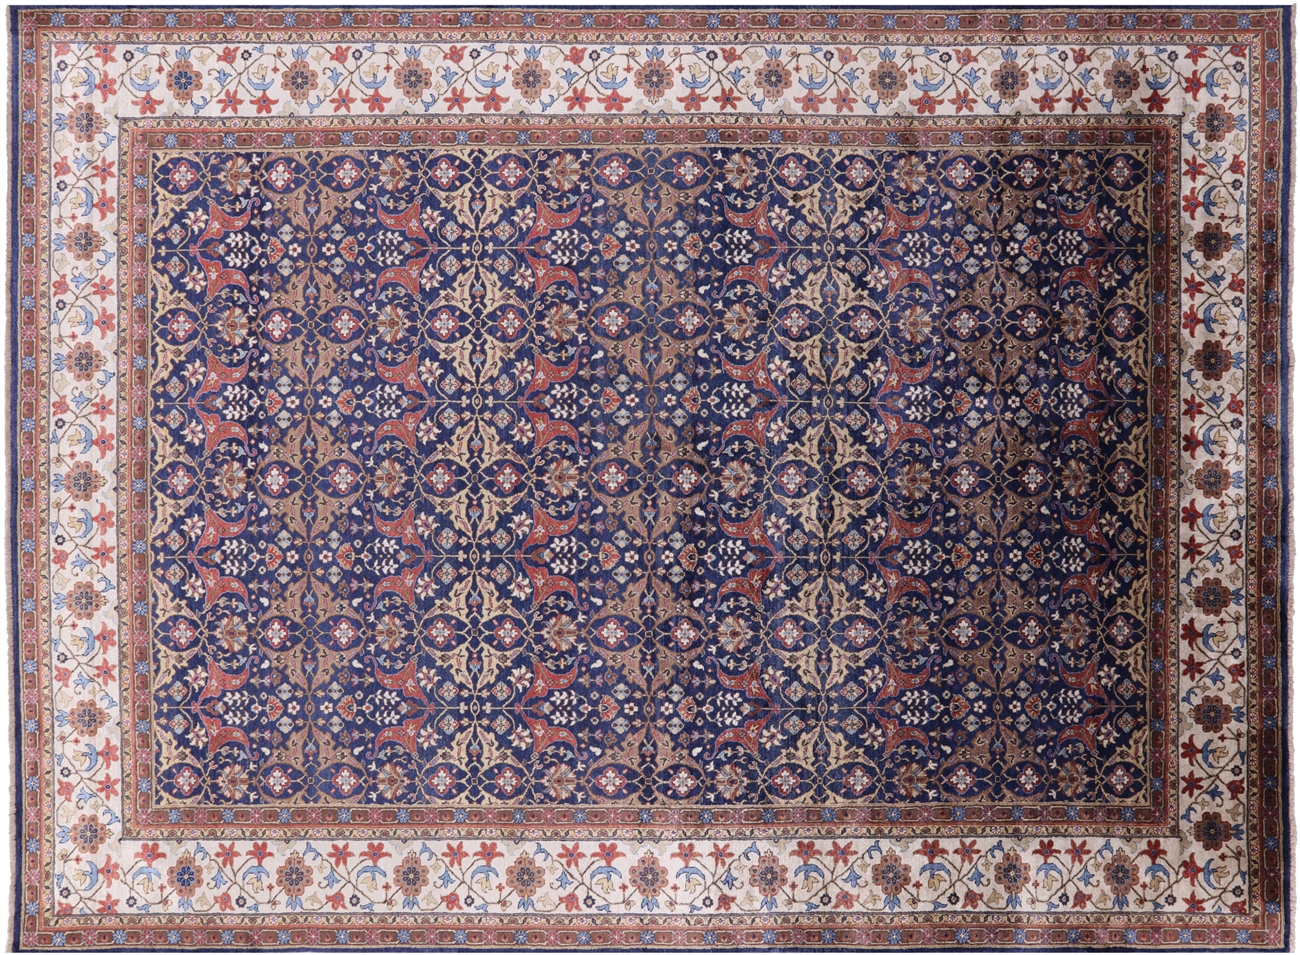 8' 9" X 11' 9" Persian Hand-Knotted Silk Area Rug